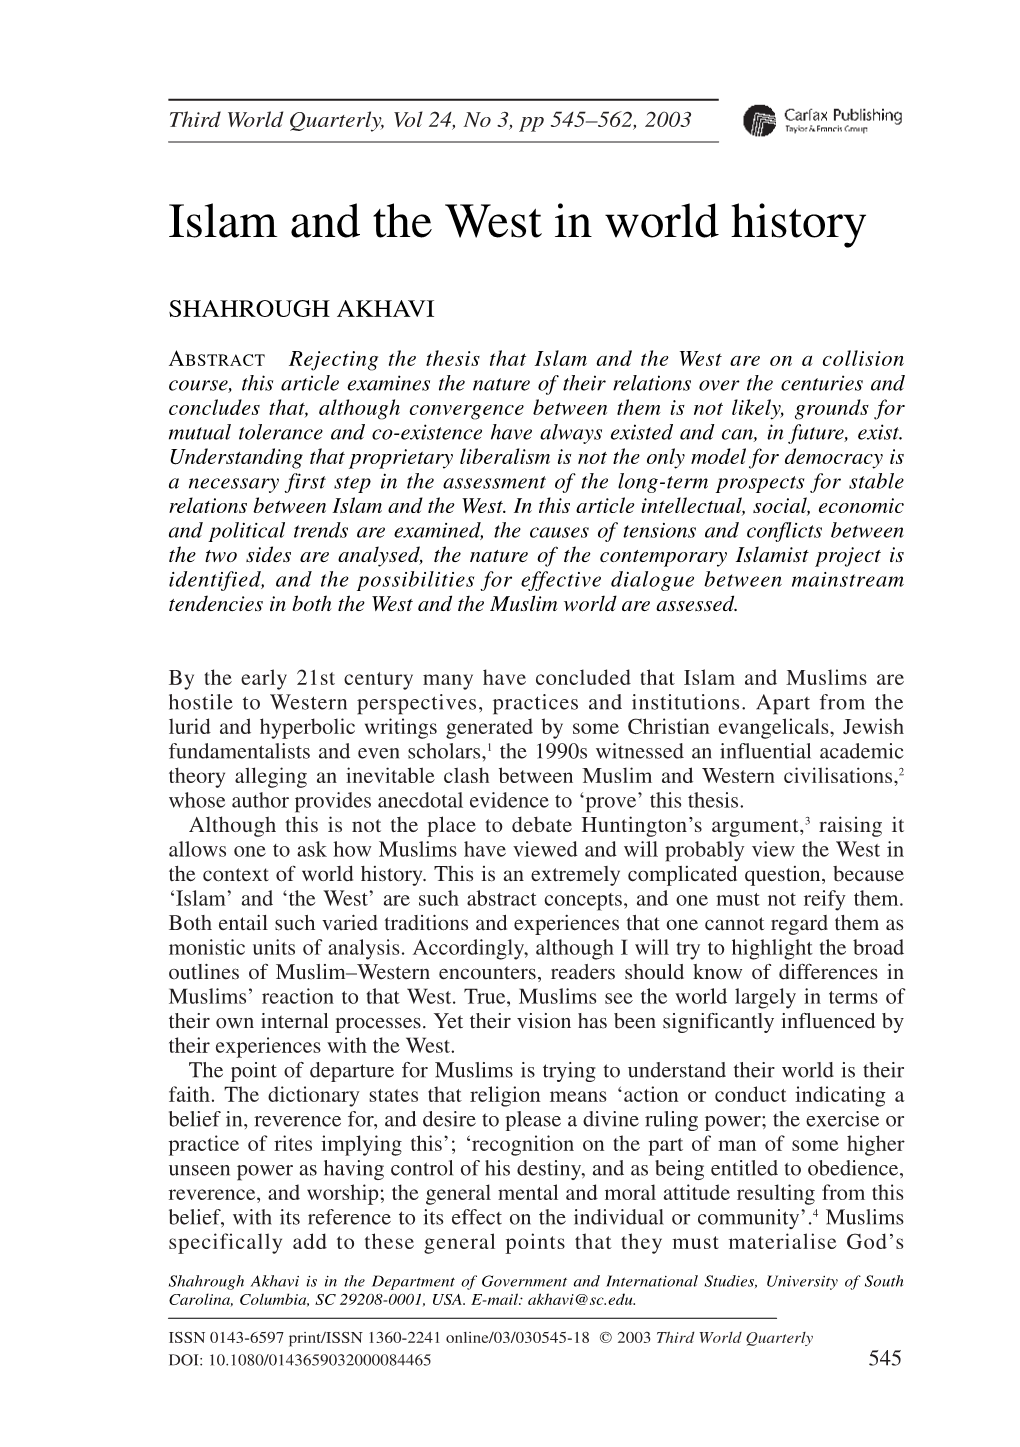 Islam and the West in World History